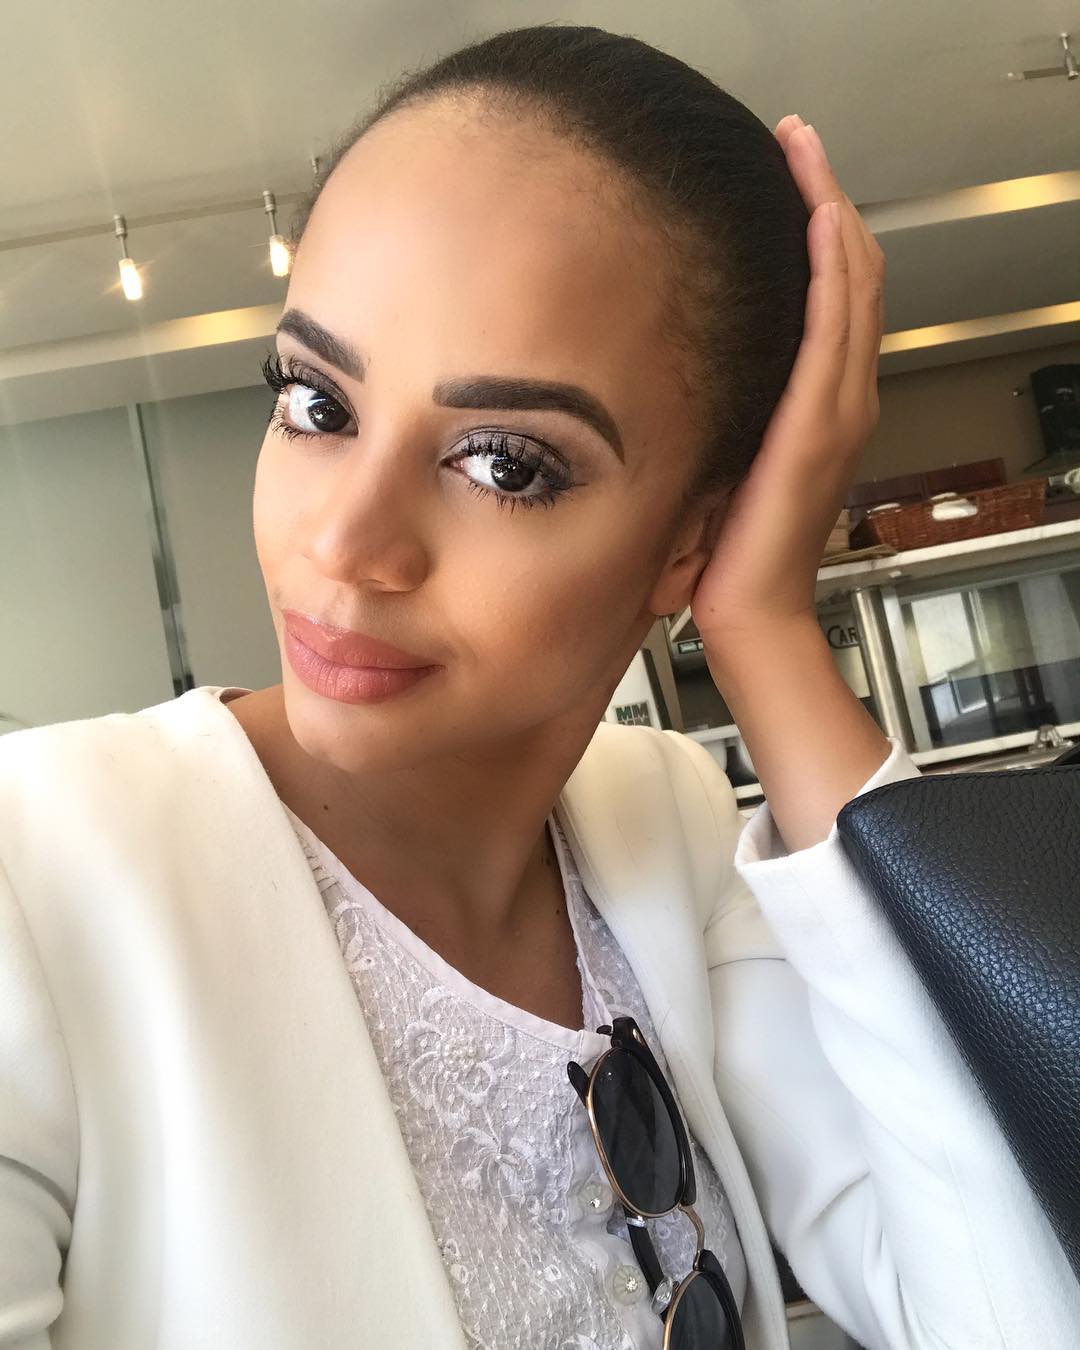 Joburgs Real Housewives Features Former Miss Botswana Free Download